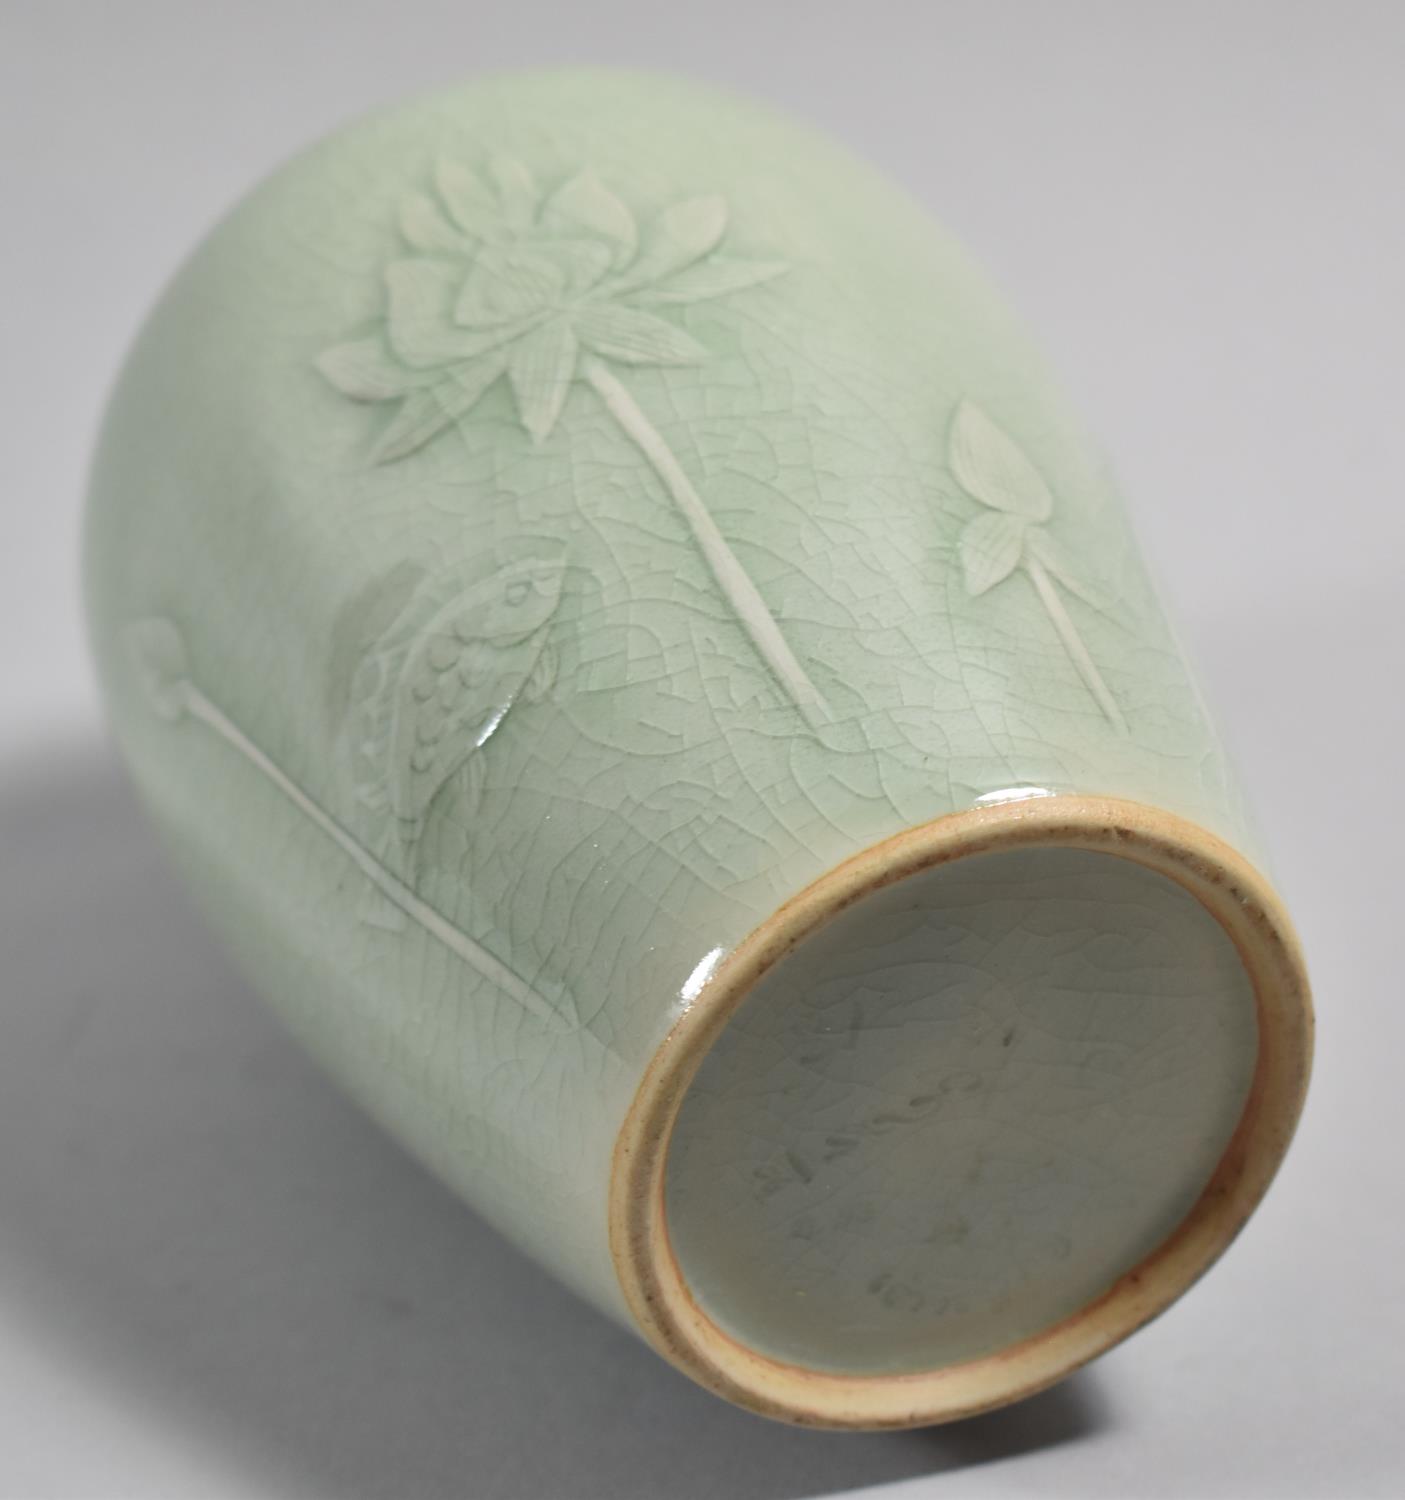 A Thai Celadon Crackle Glazed Vase, in Perfect Condition, 16.5cm high - Image 2 of 2